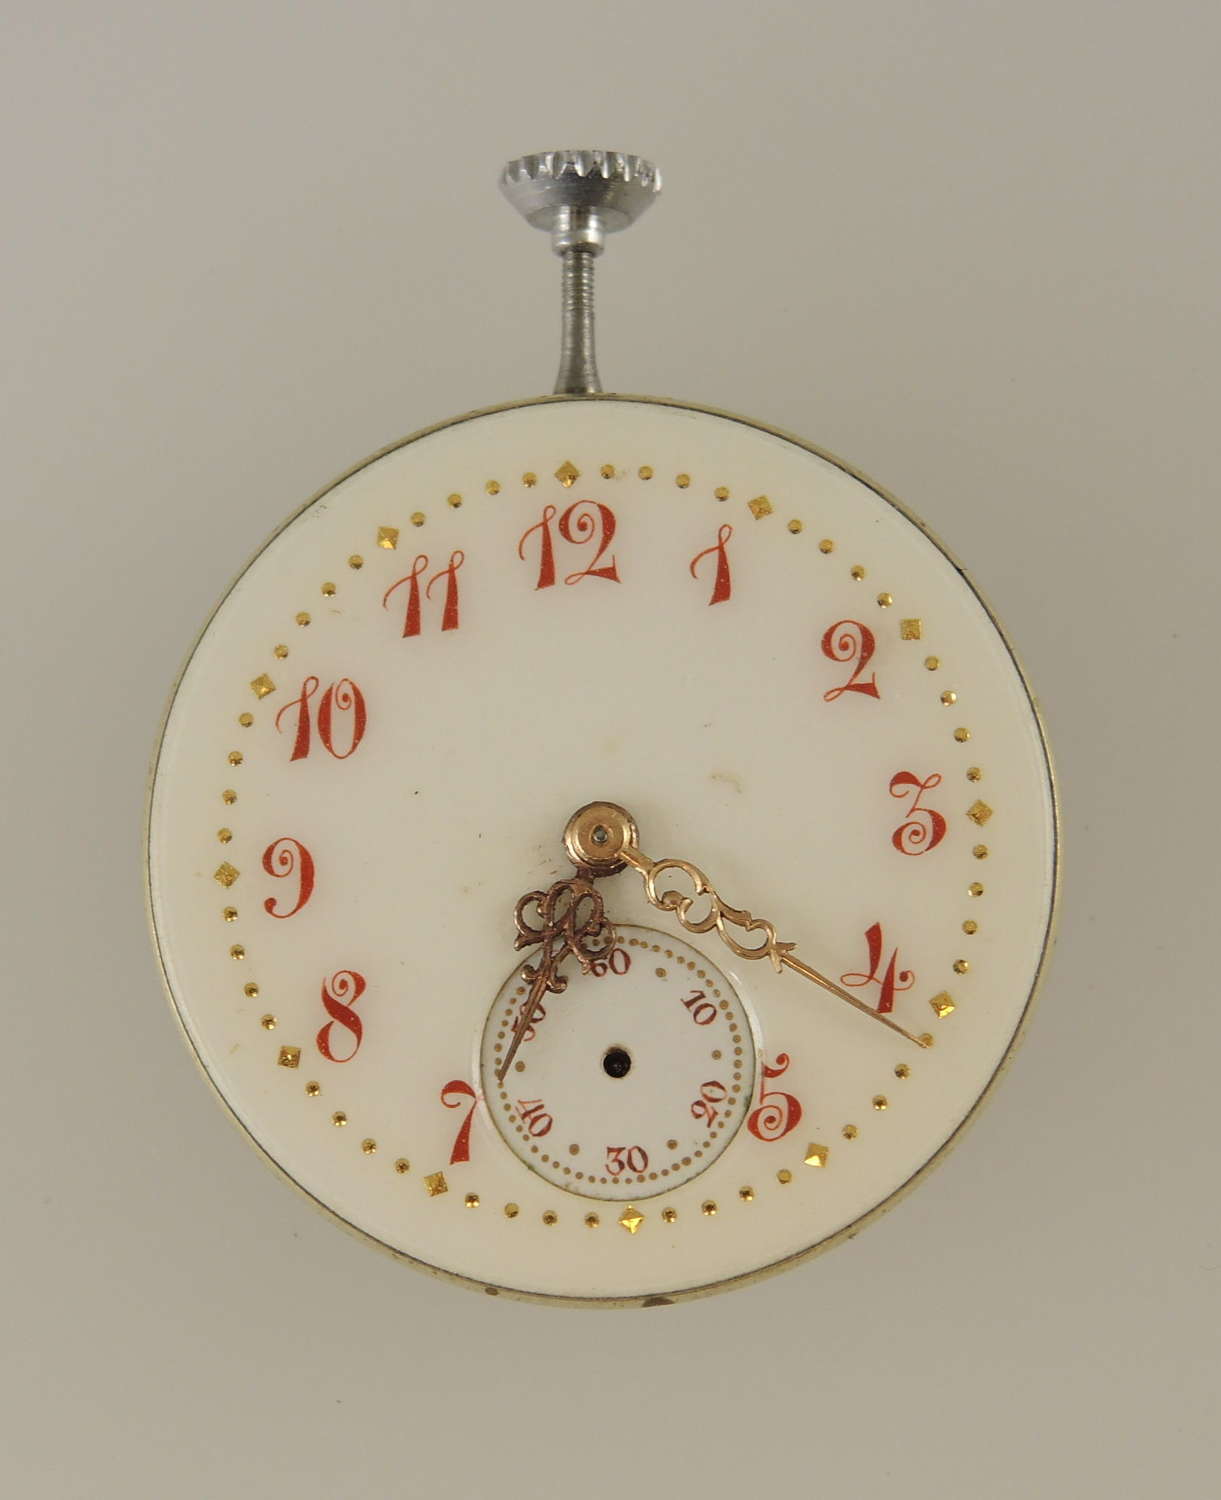 High quality ladies pocket watch movement with a fancy dial c1890